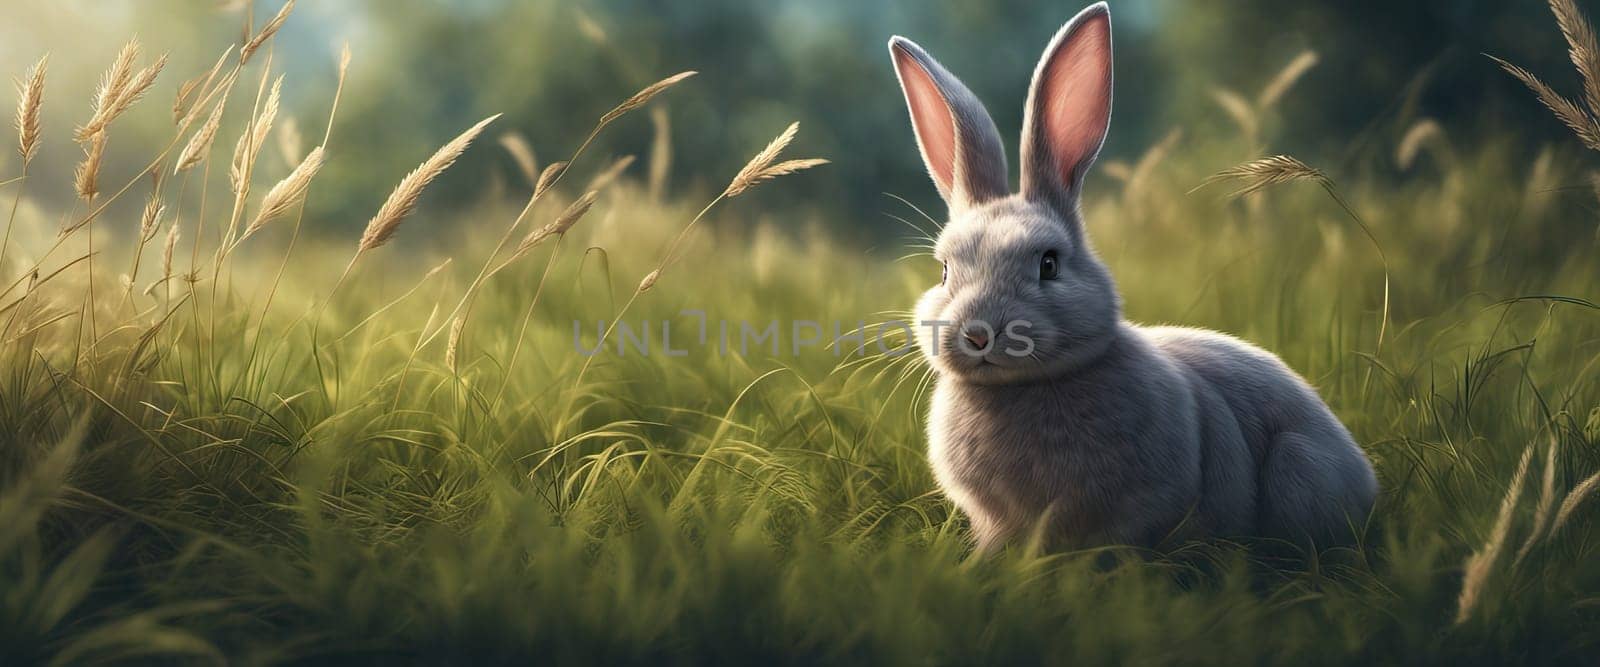 Banner fluffy bunny in a green garden on a sunny day Easter animals background. by EkaterinaPereslavtseva